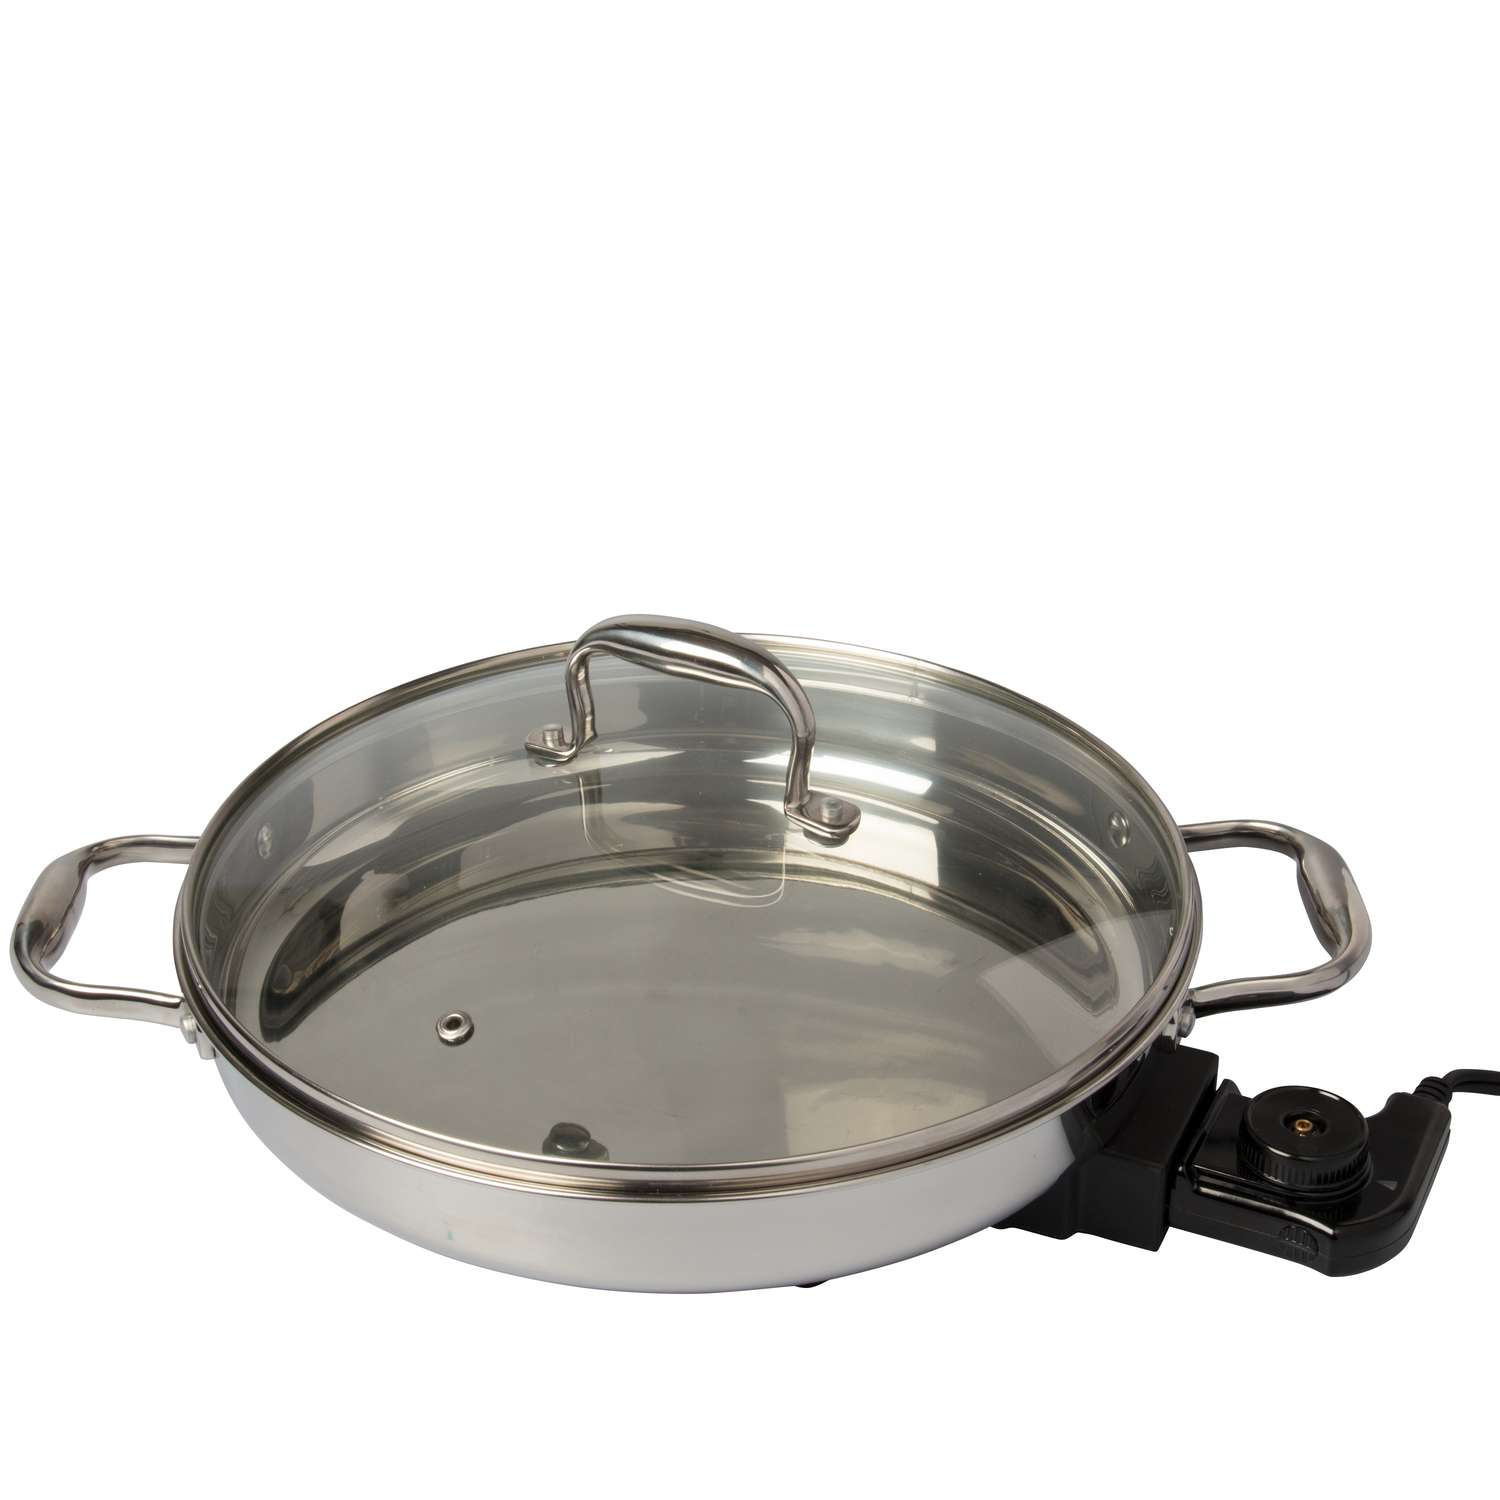  Electric Skillet By Cucina Pro - 18/10 Stainless Steel